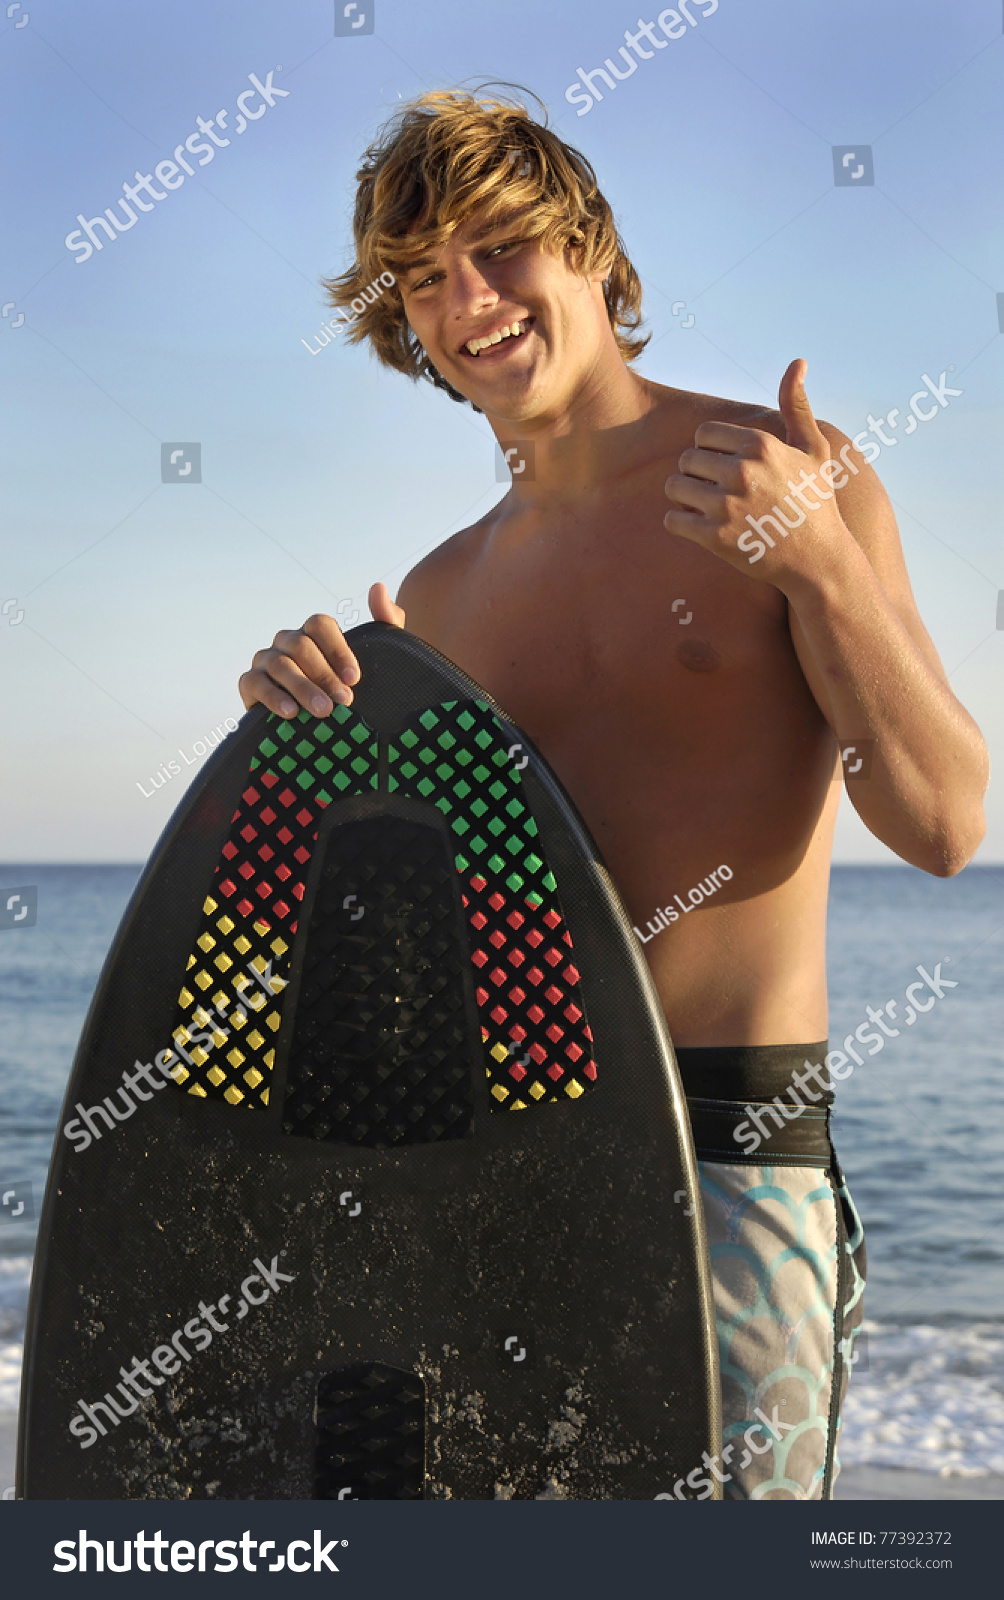 Handsome Surfer Posing In The Beach Stock Photo 77392372 : Shutterstock